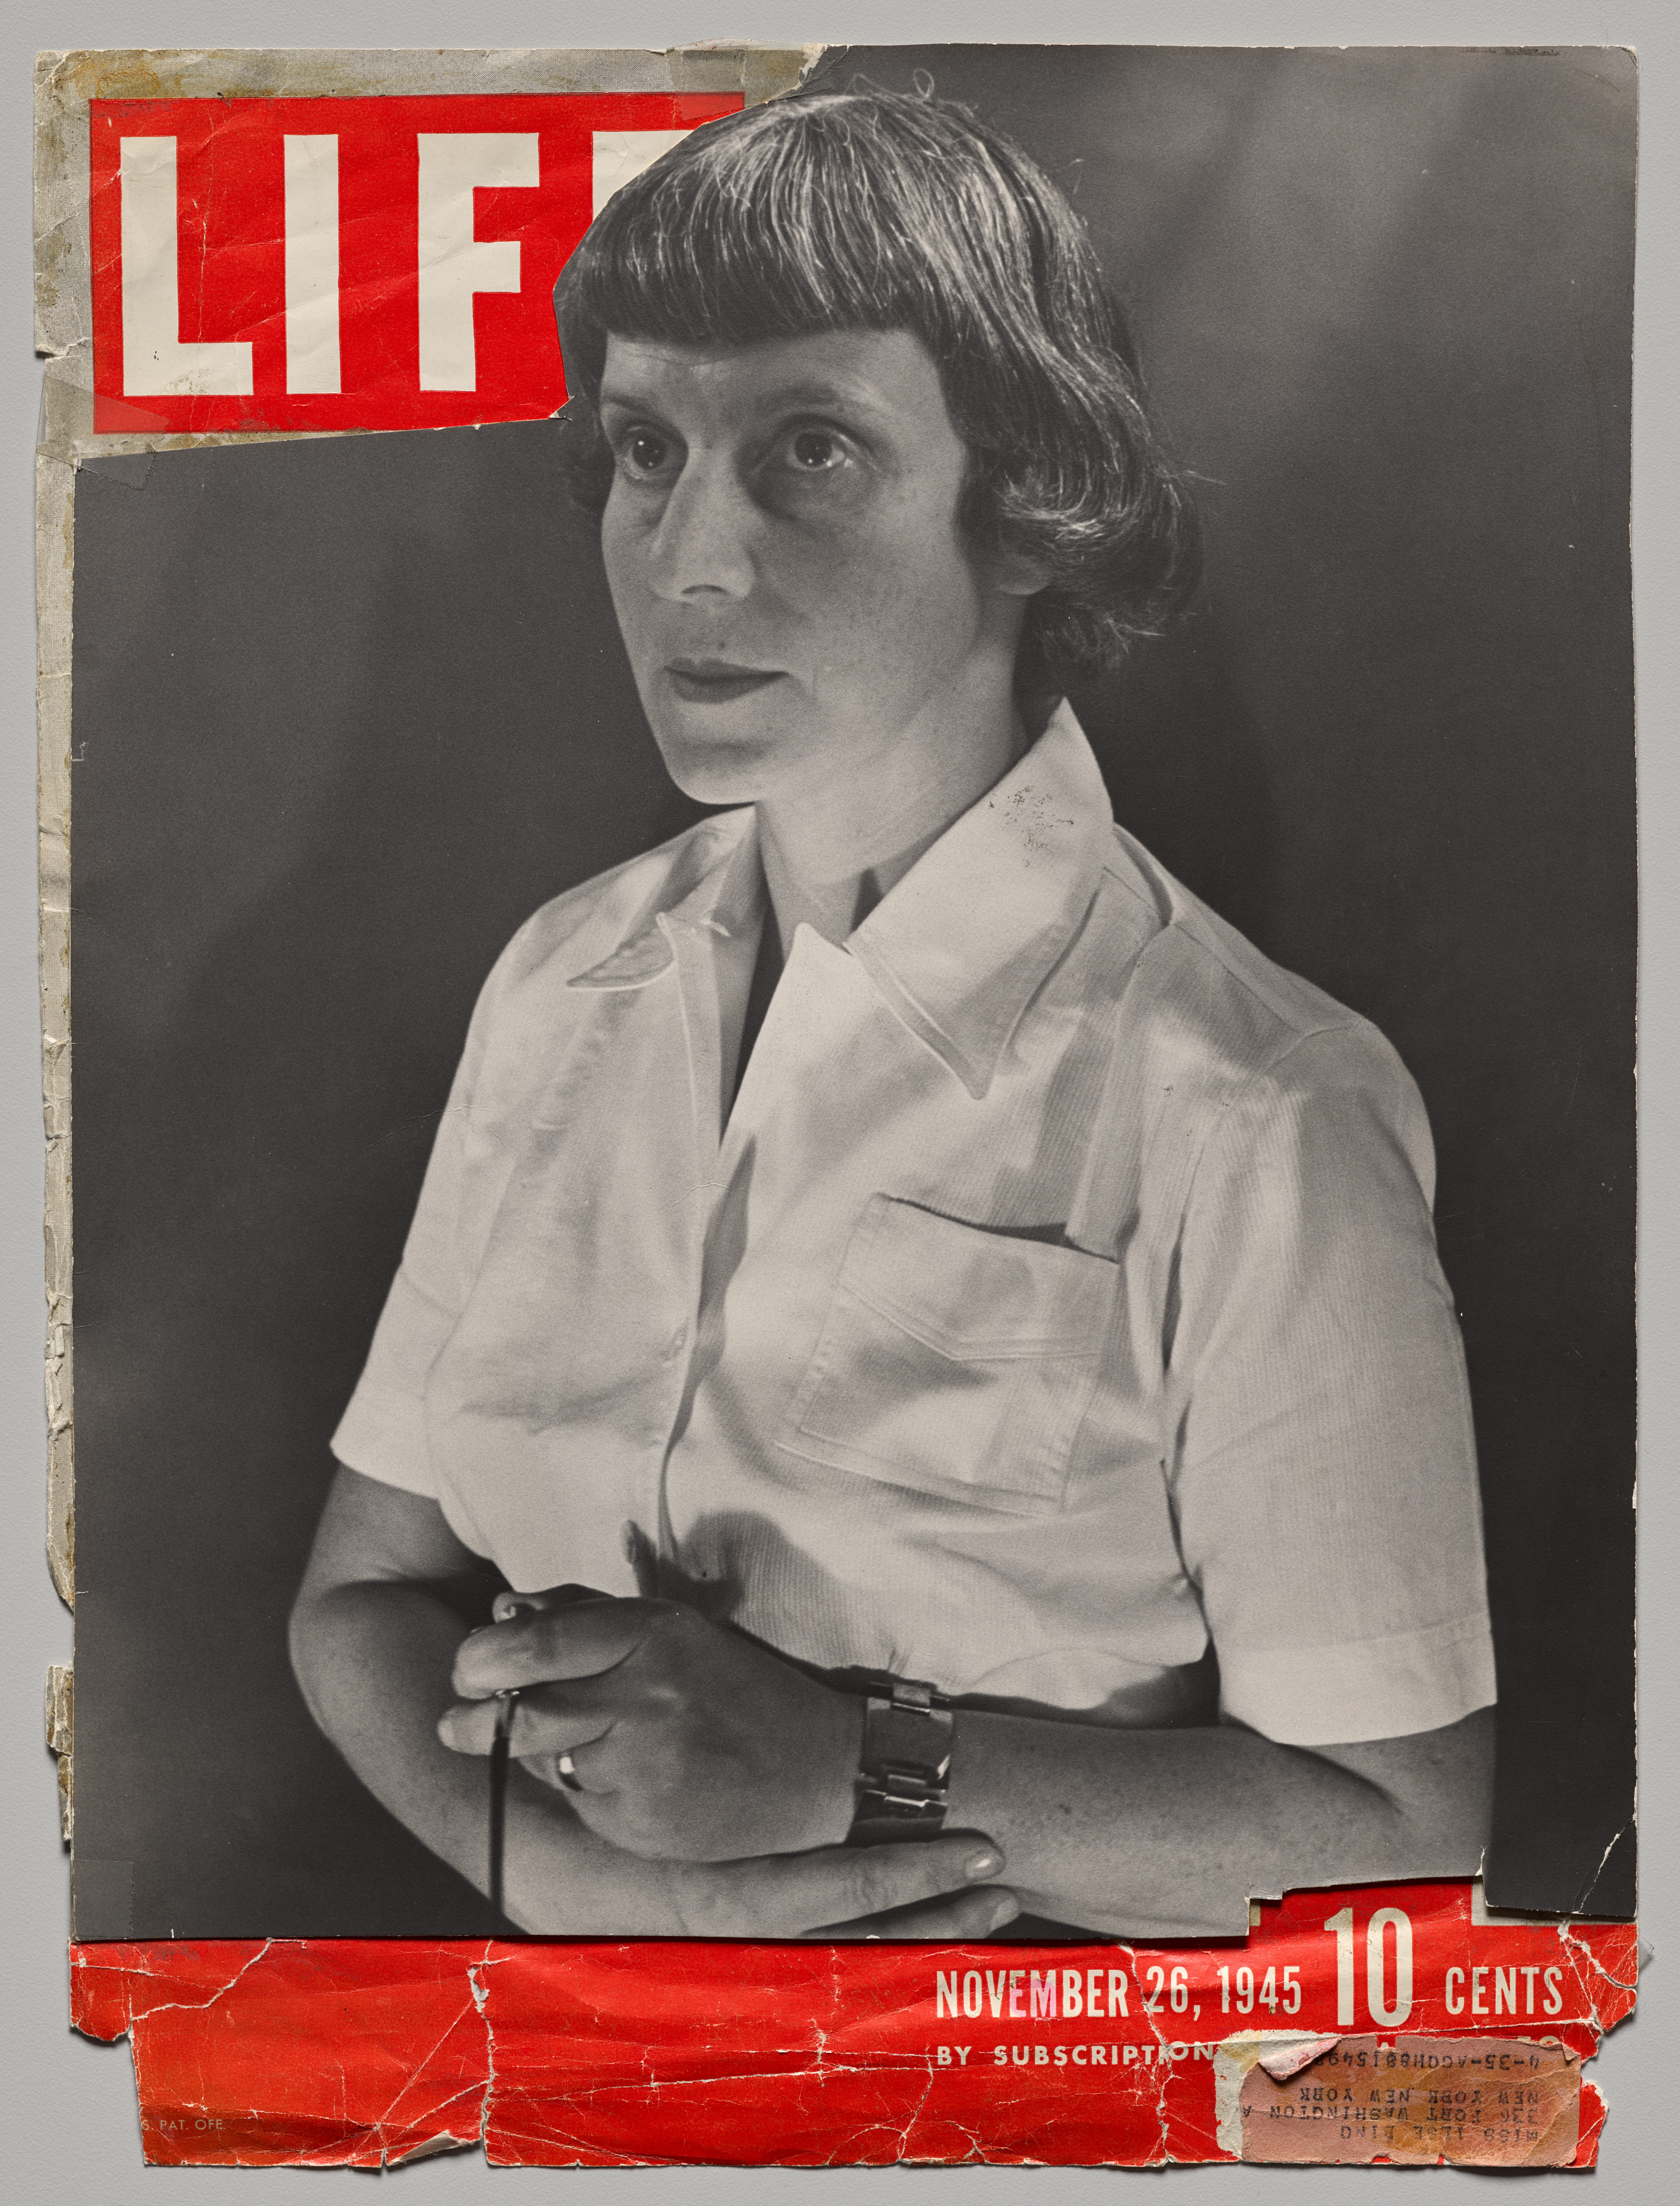 Mock LIFE Magazine Cover with Self-Portrait Holding Shutter Release